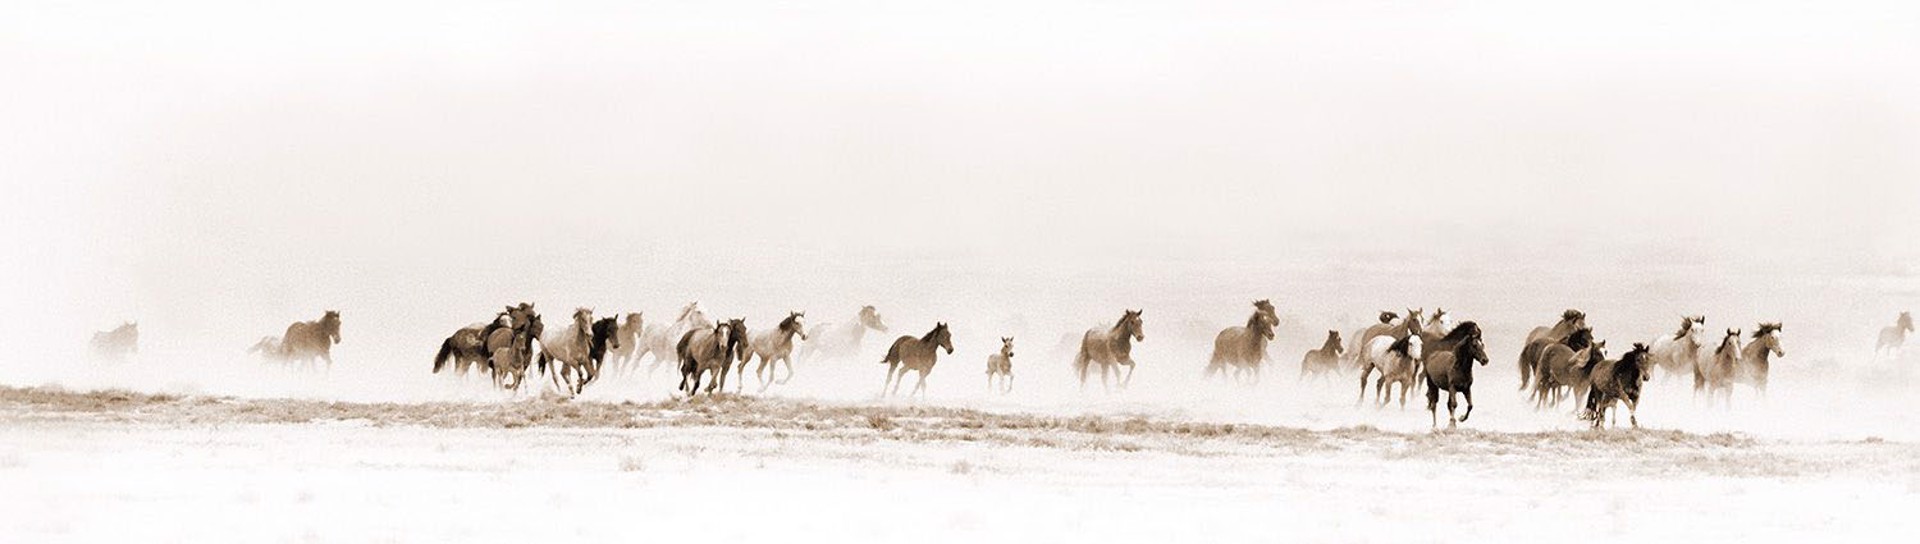 A Monochromatic Photograph Of A Herd Of Mustangs Running Across The Plains By Kimerlee Curyl At Gallery Wild